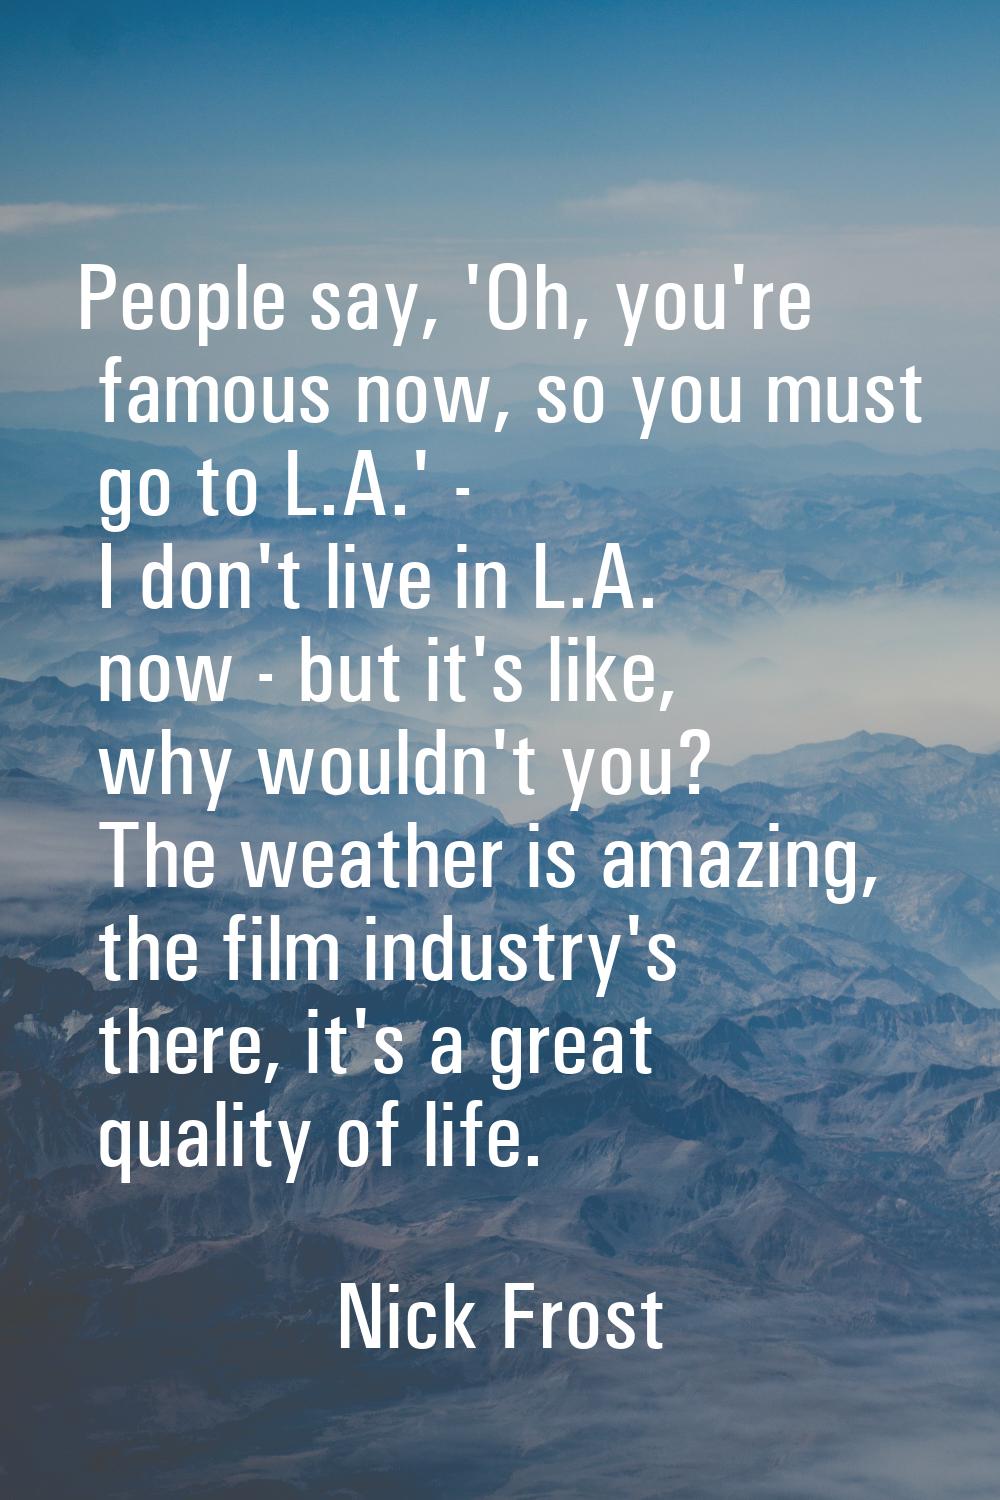 People say, 'Oh, you're famous now, so you must go to L.A.' - I don't live in L.A. now - but it's l